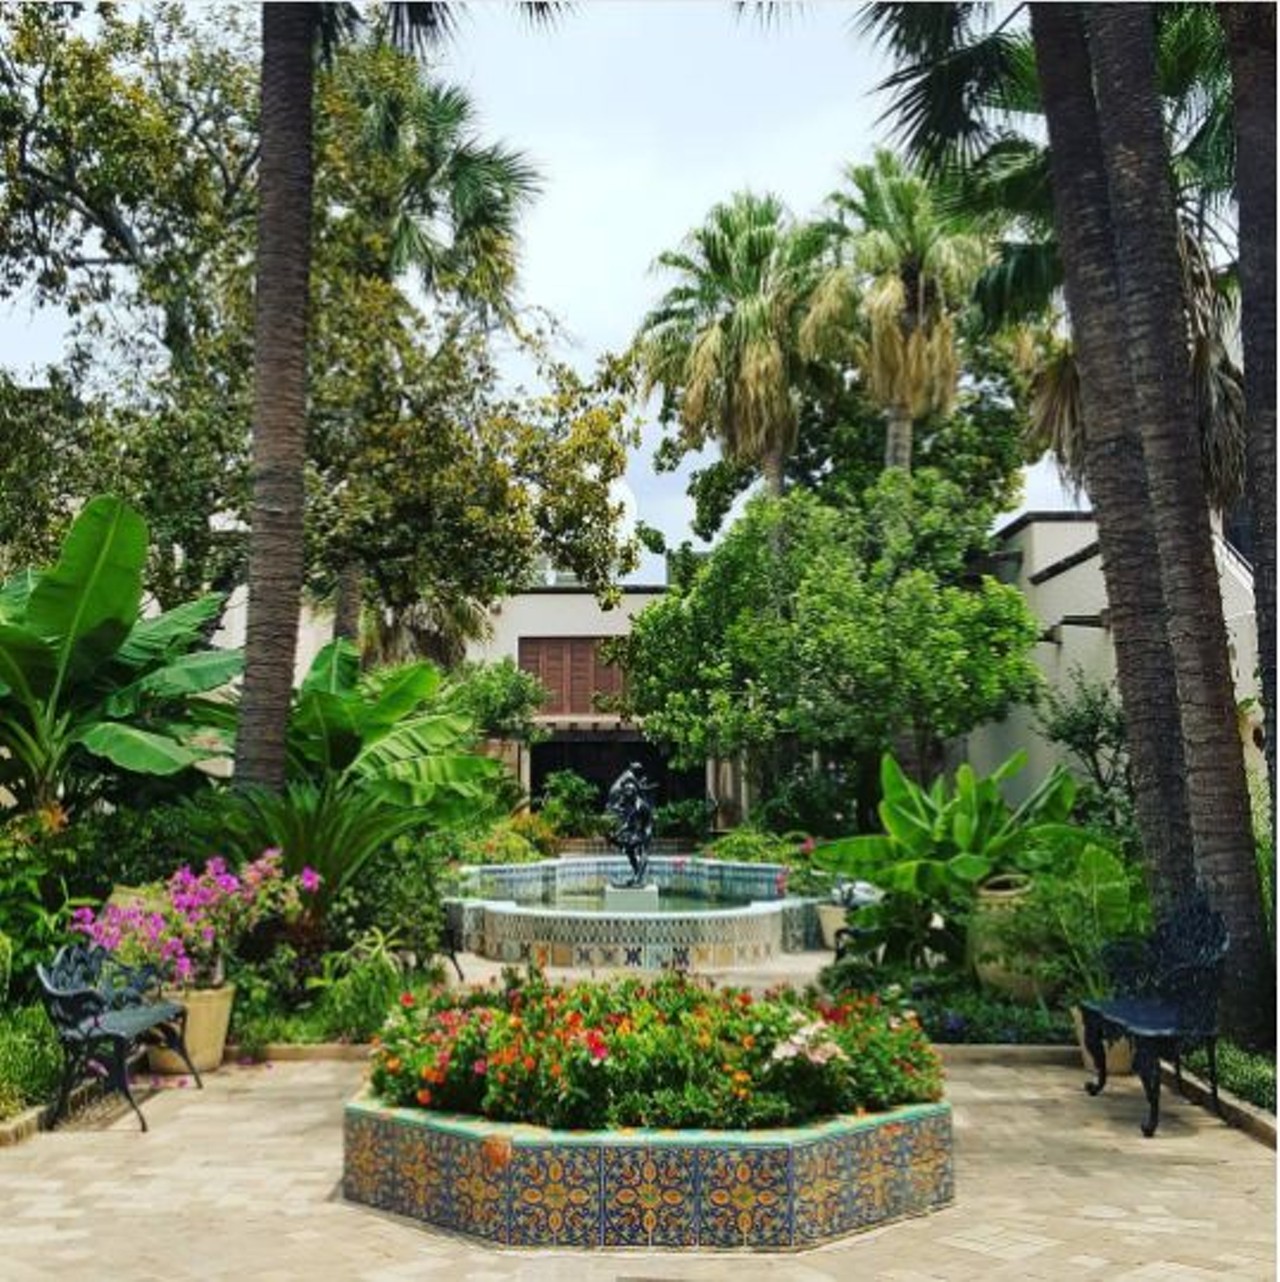 The McNay
6000 N. New Braunfels Avenue, (210) 824-5368 
The McNay is a picture-perfect make out spot with its architecture, fountains and lush gardens. 
Photo via Instagram, nanalubxl